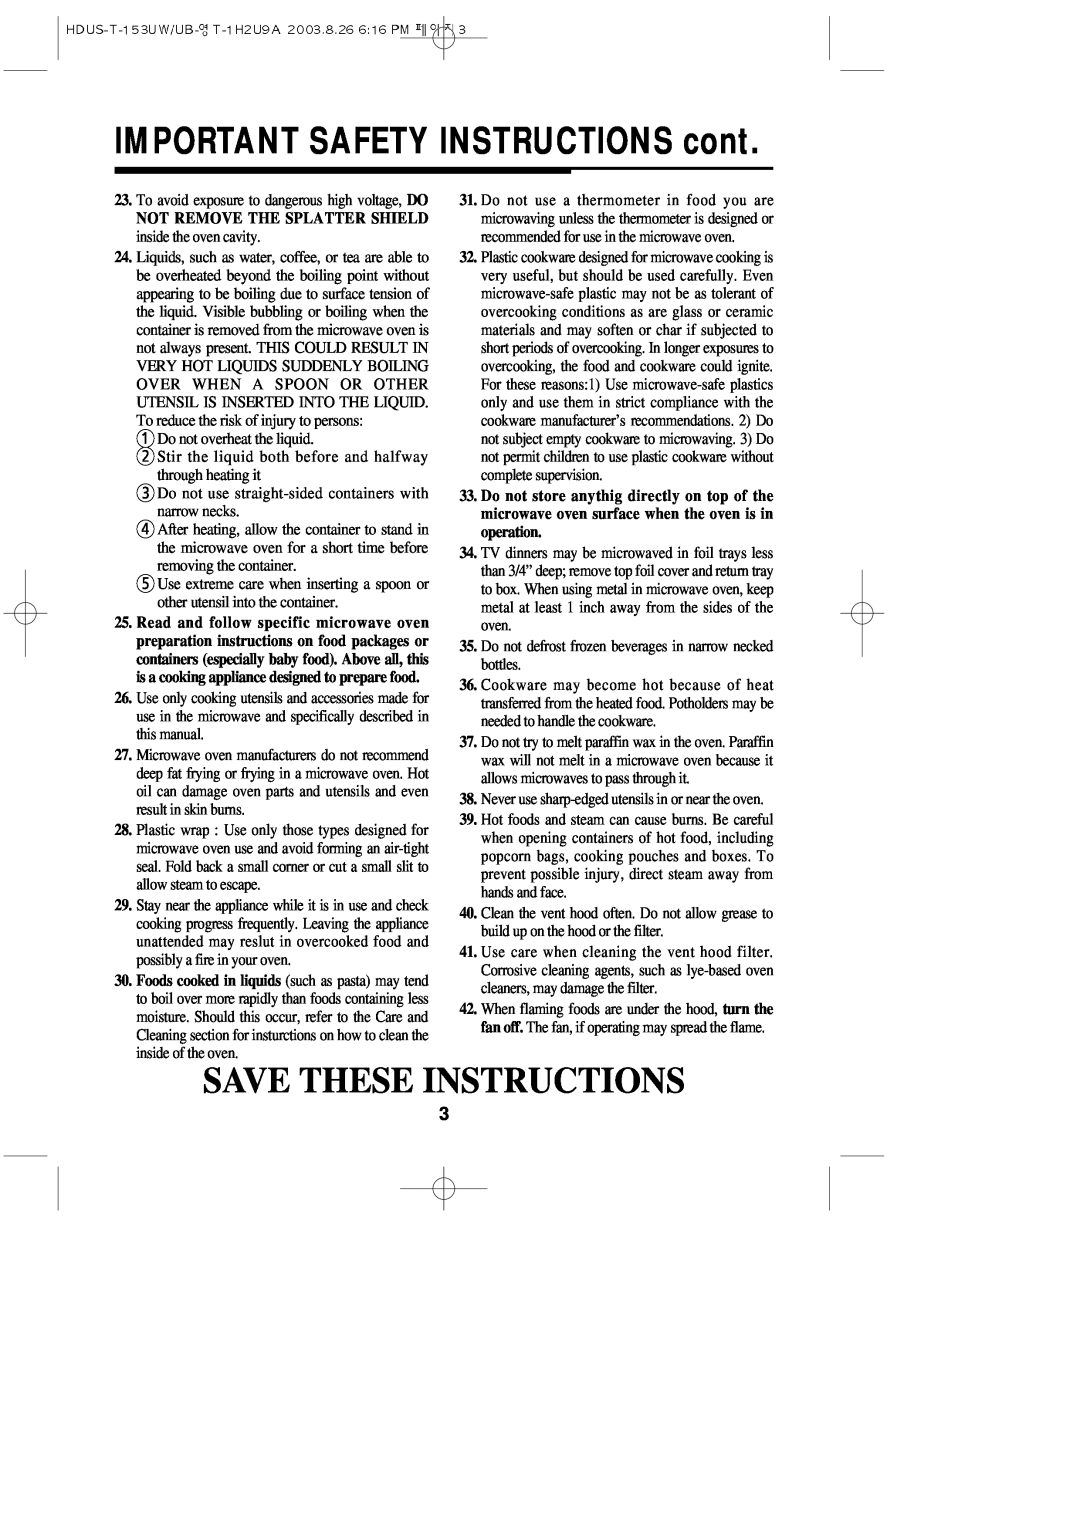 Magic Chef MCO153UQ, MCO153UW, MCO153UB IMPORTANT SAFETY INSTRUCTIONS cont, Save These Instructions 